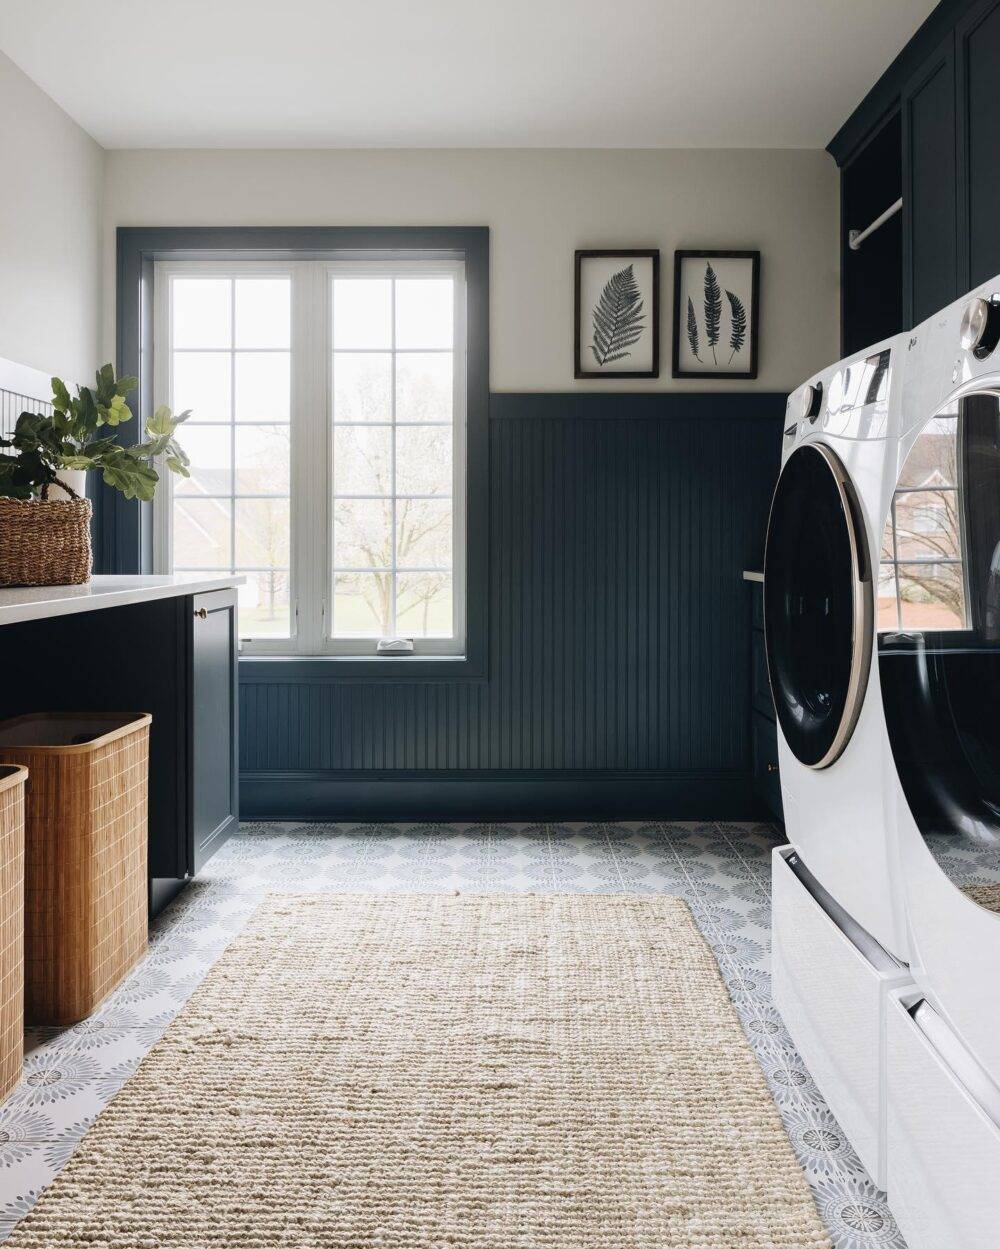 A laundry room with a geometric floral patterned floor tile. 